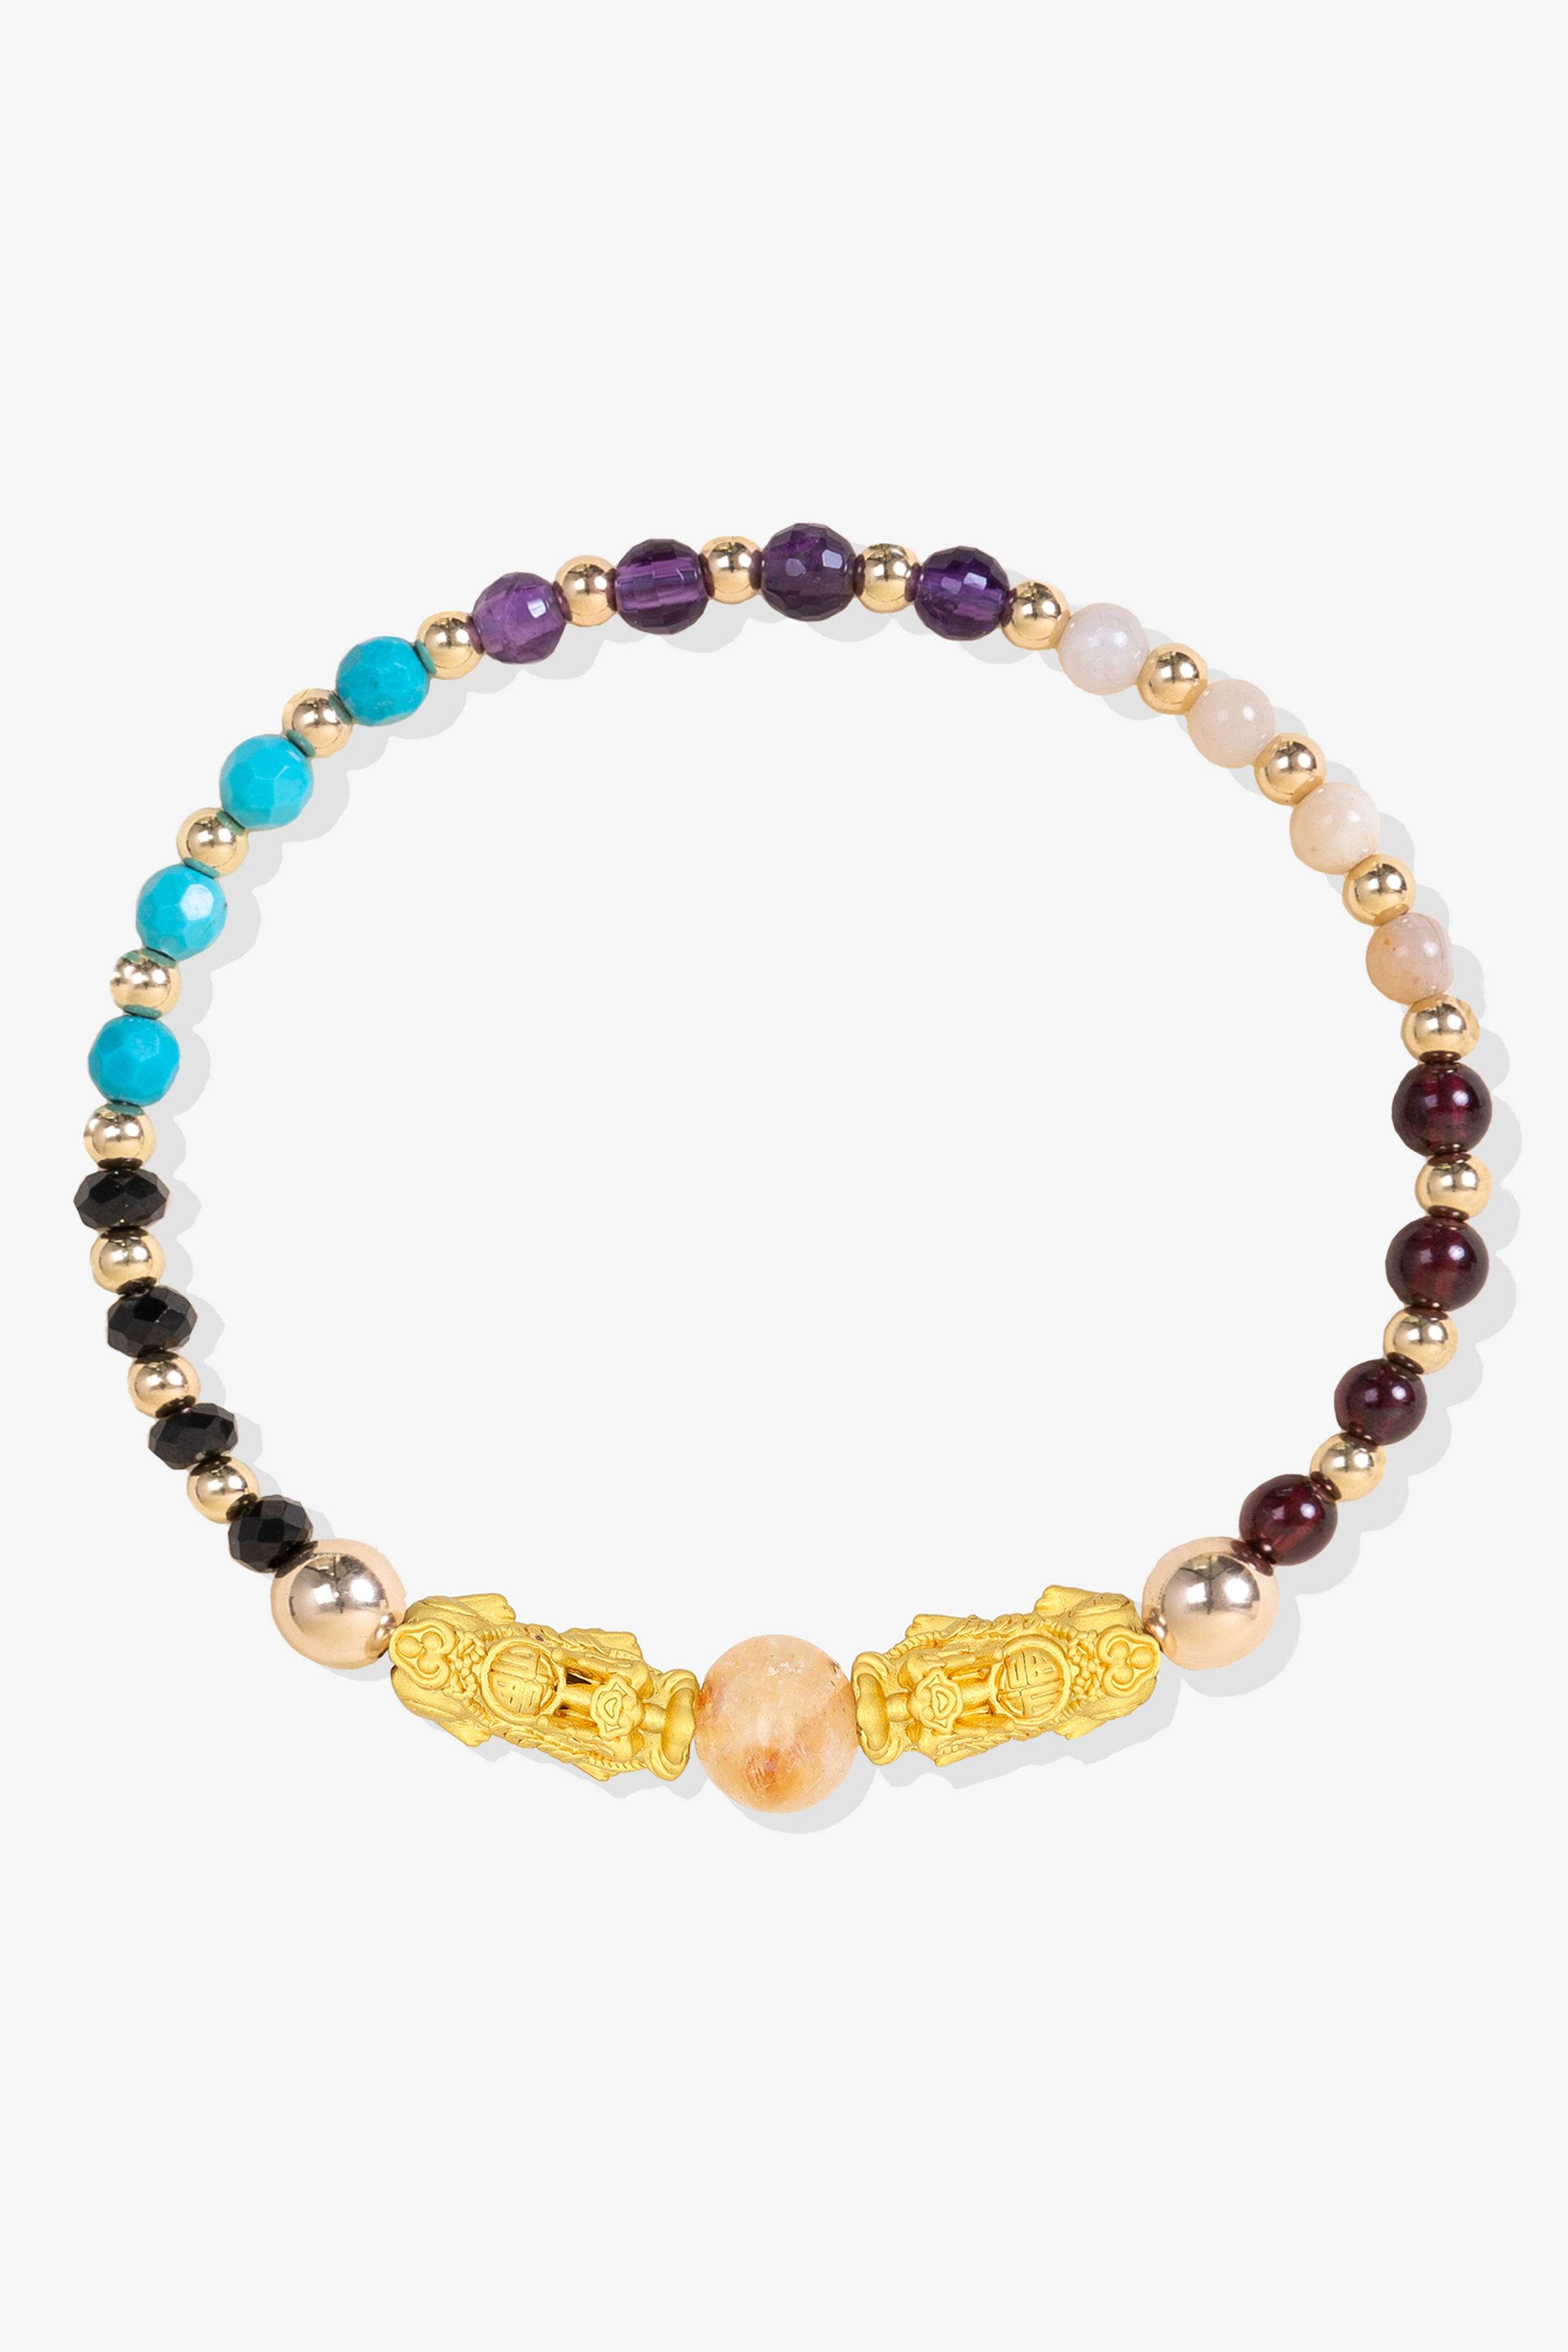 Multiple Blessing Double Pixiu and Citrine Feng Shui Bracelet 14k REAL Gold